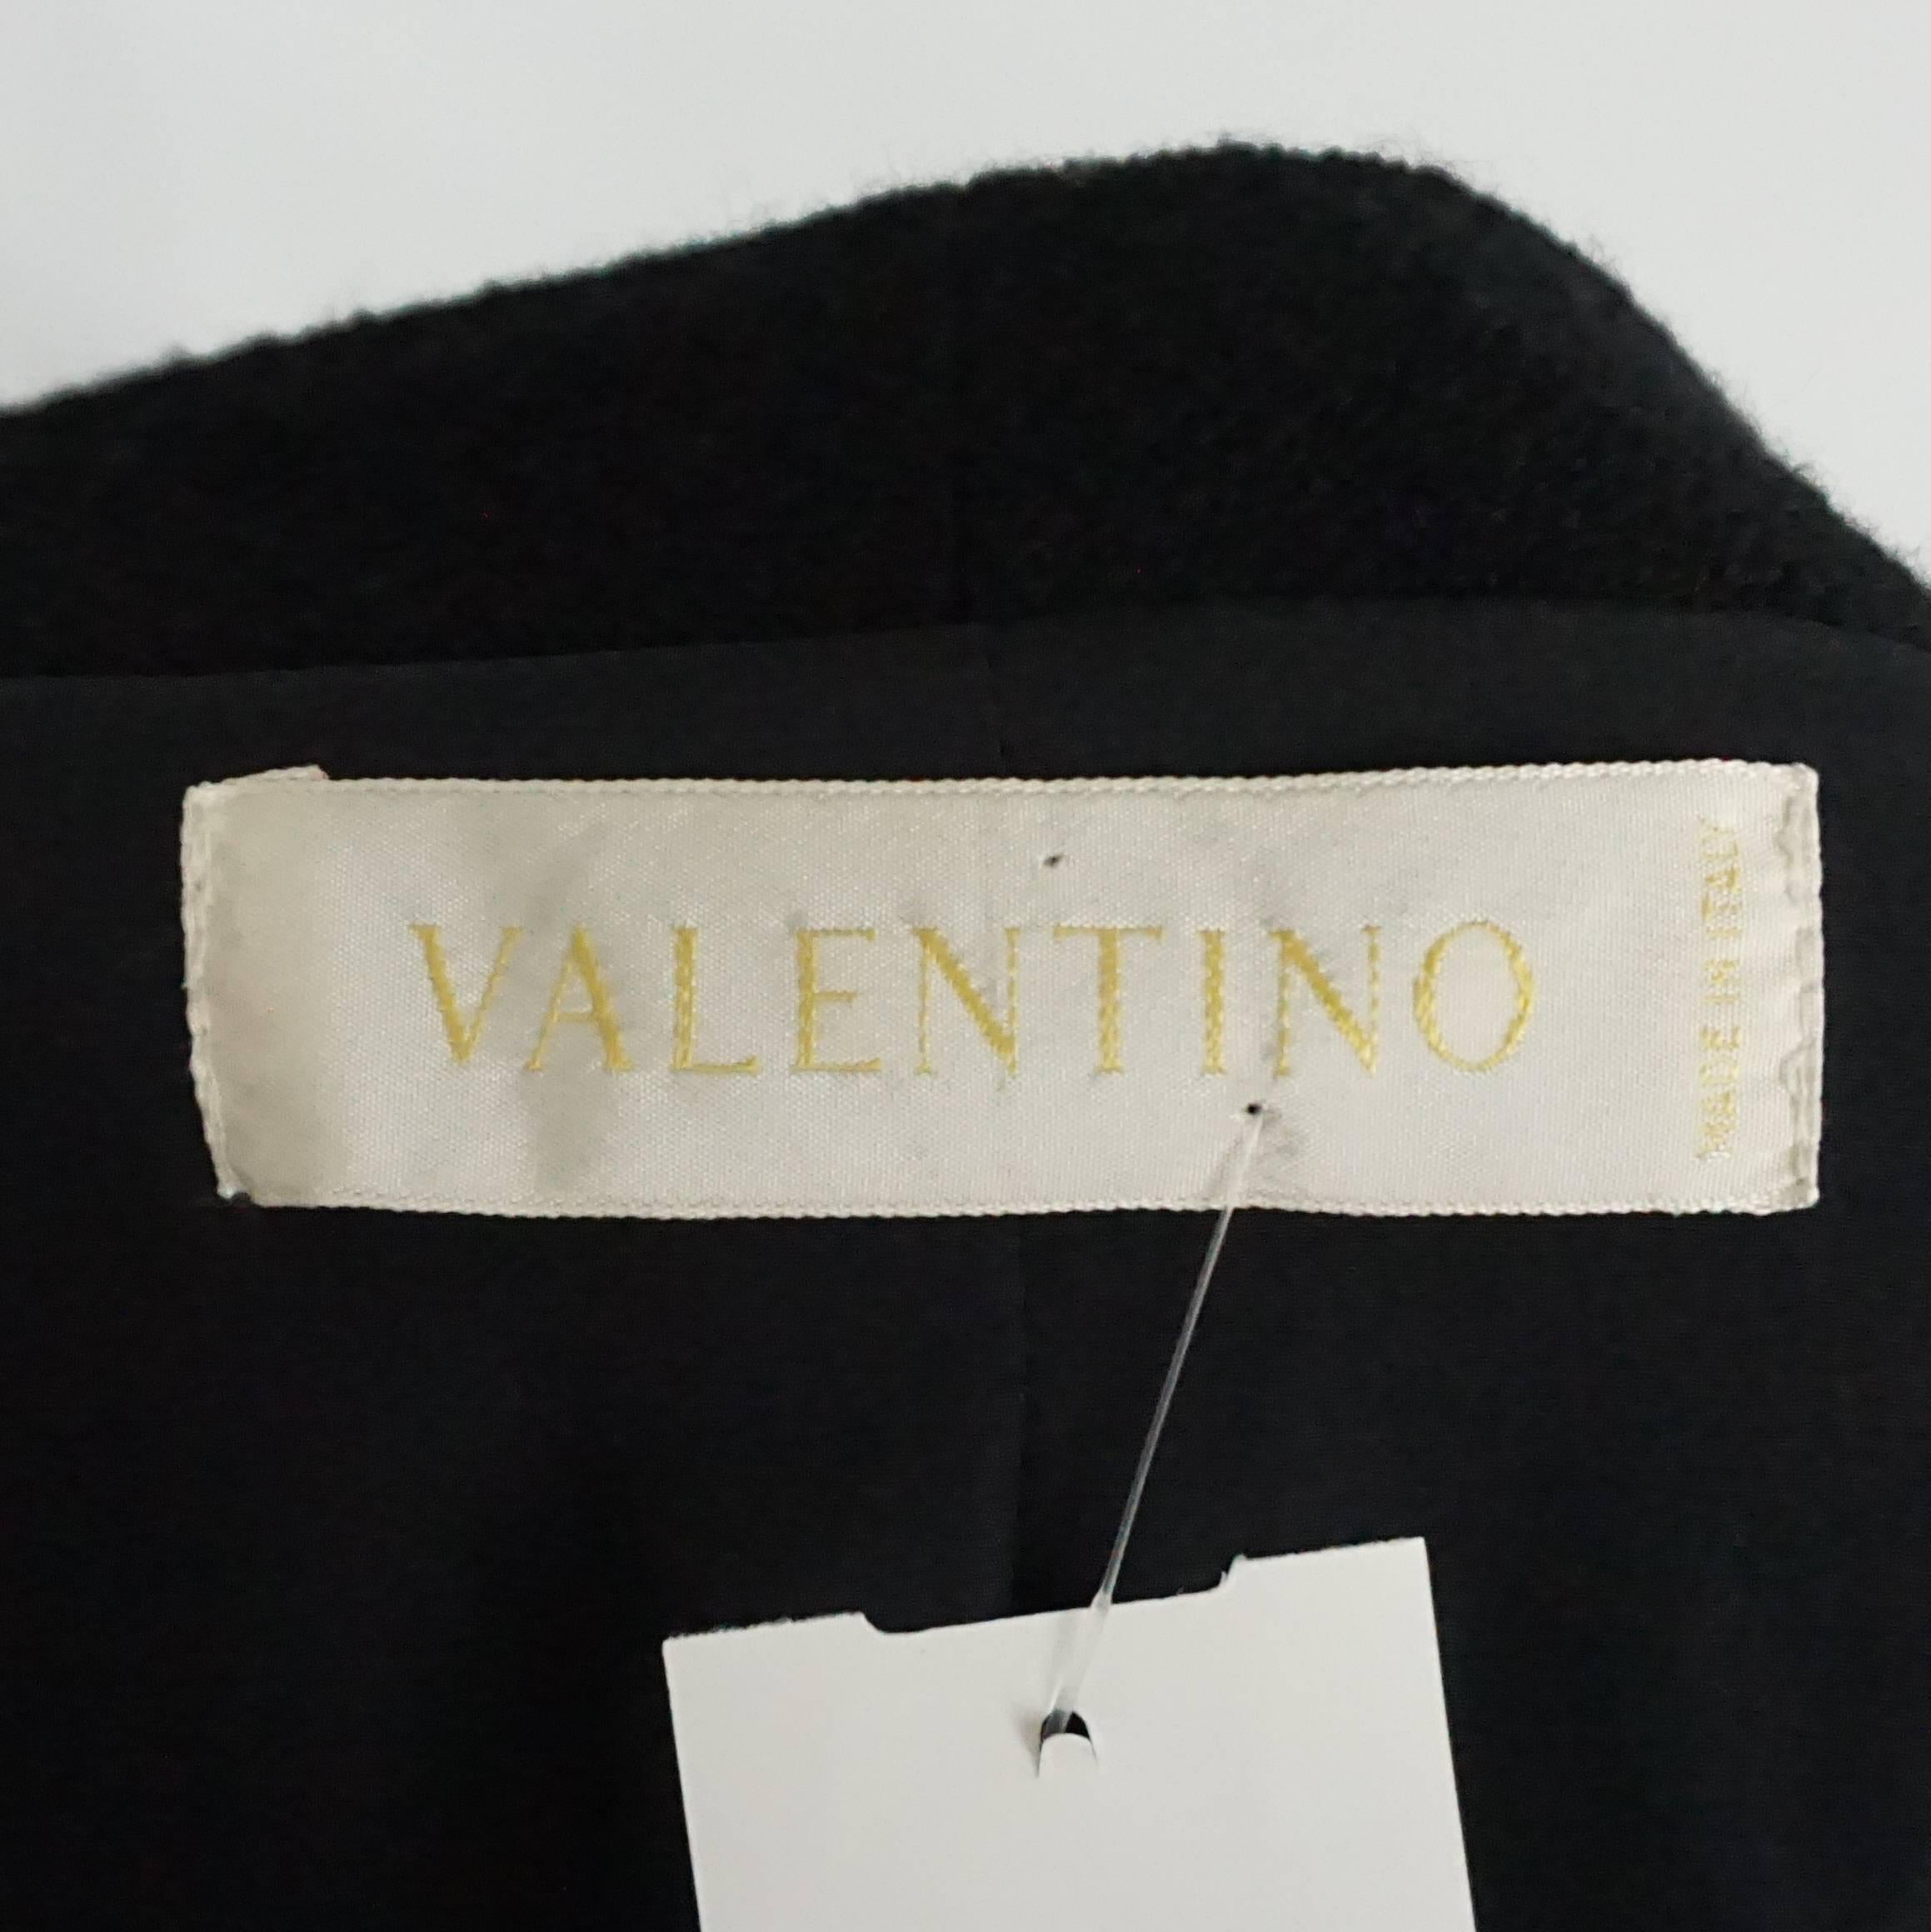 Women's Valentino Black Wool Jacket with Thick Petal Sleeves - 10